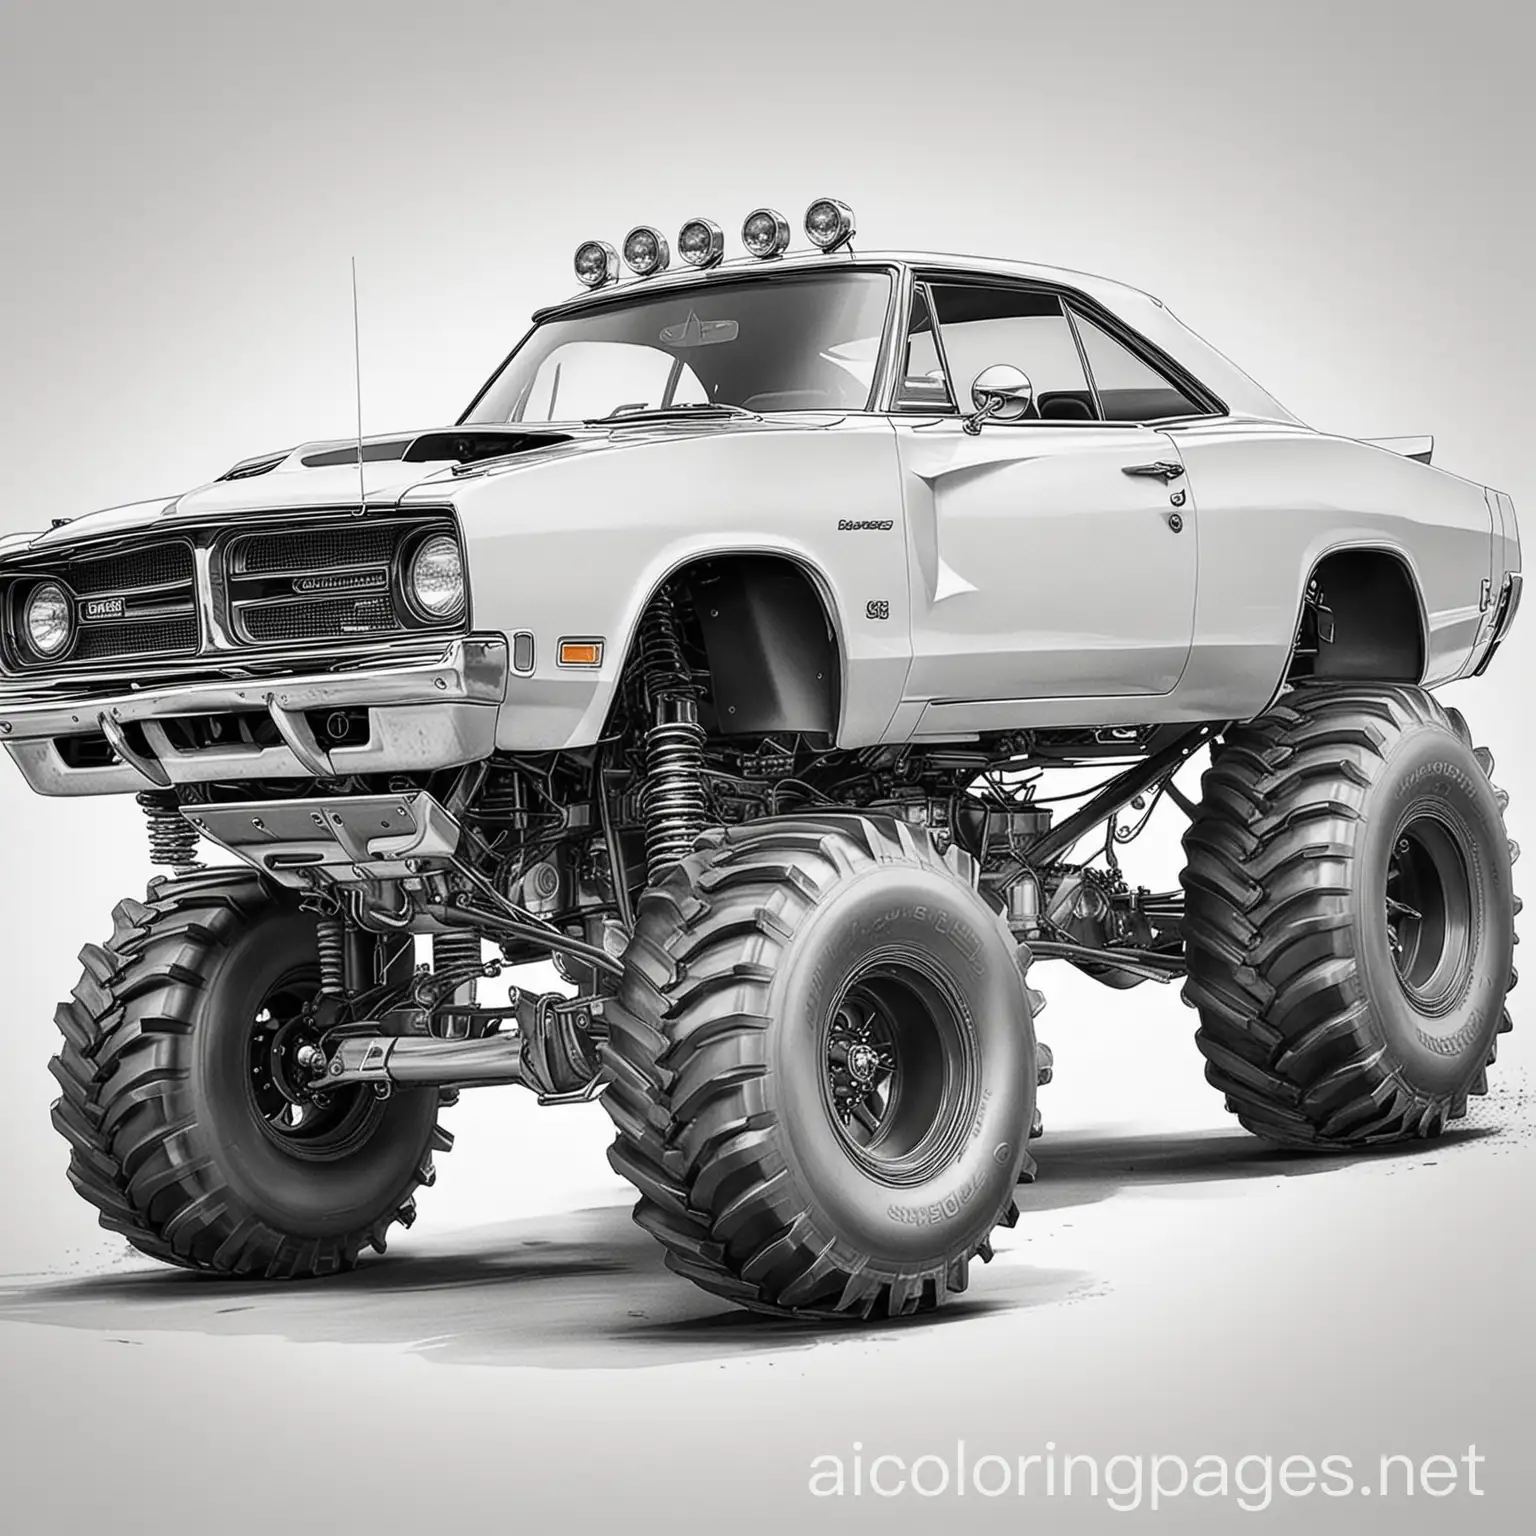 68-Dodge-Charger-Monster-Truck-Coloring-Page